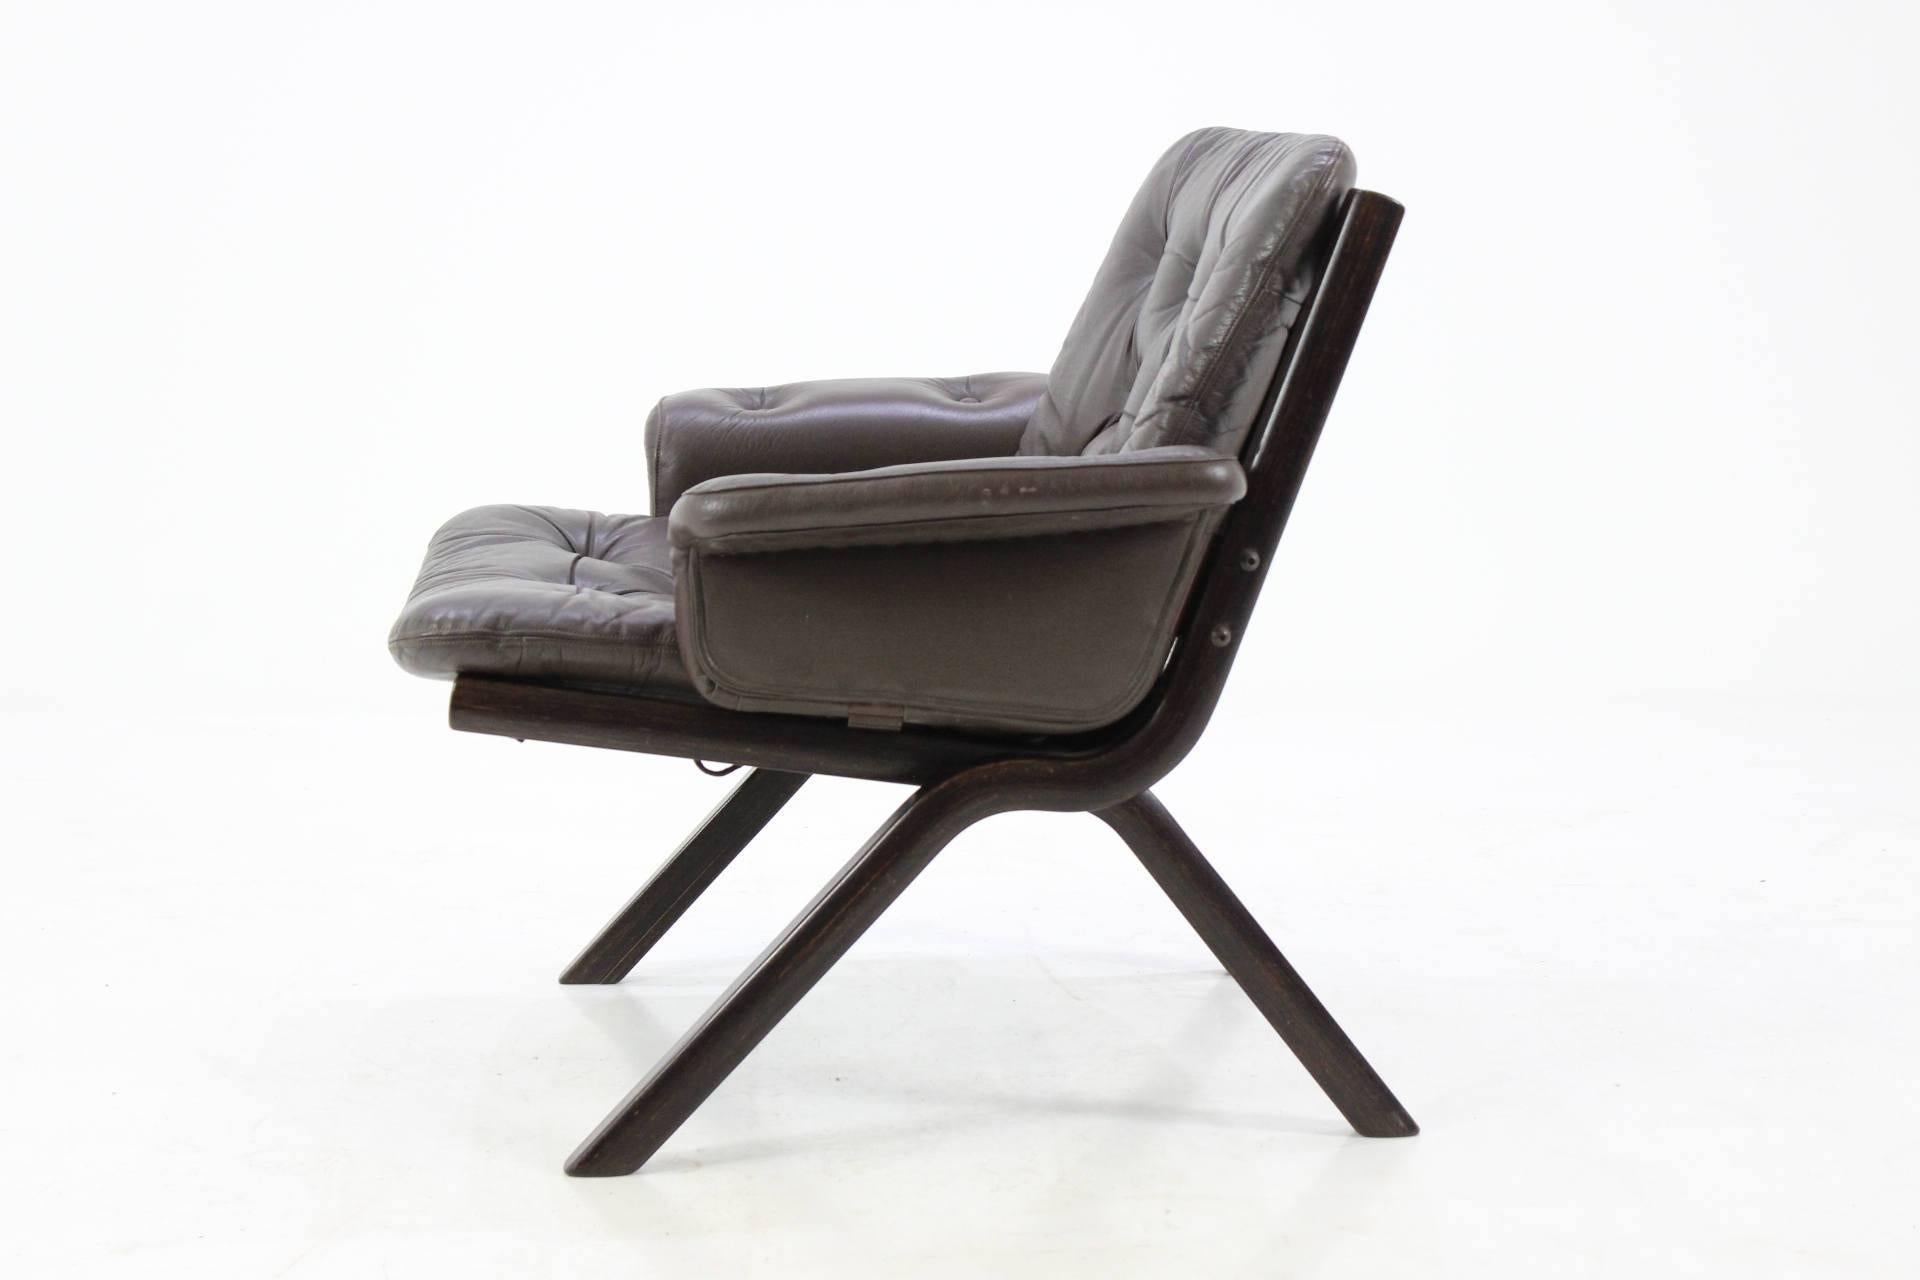 Danish bentwood armchair, 1960s. This armchair has original upholstery in dark brown leather .The item is in very good original condition.